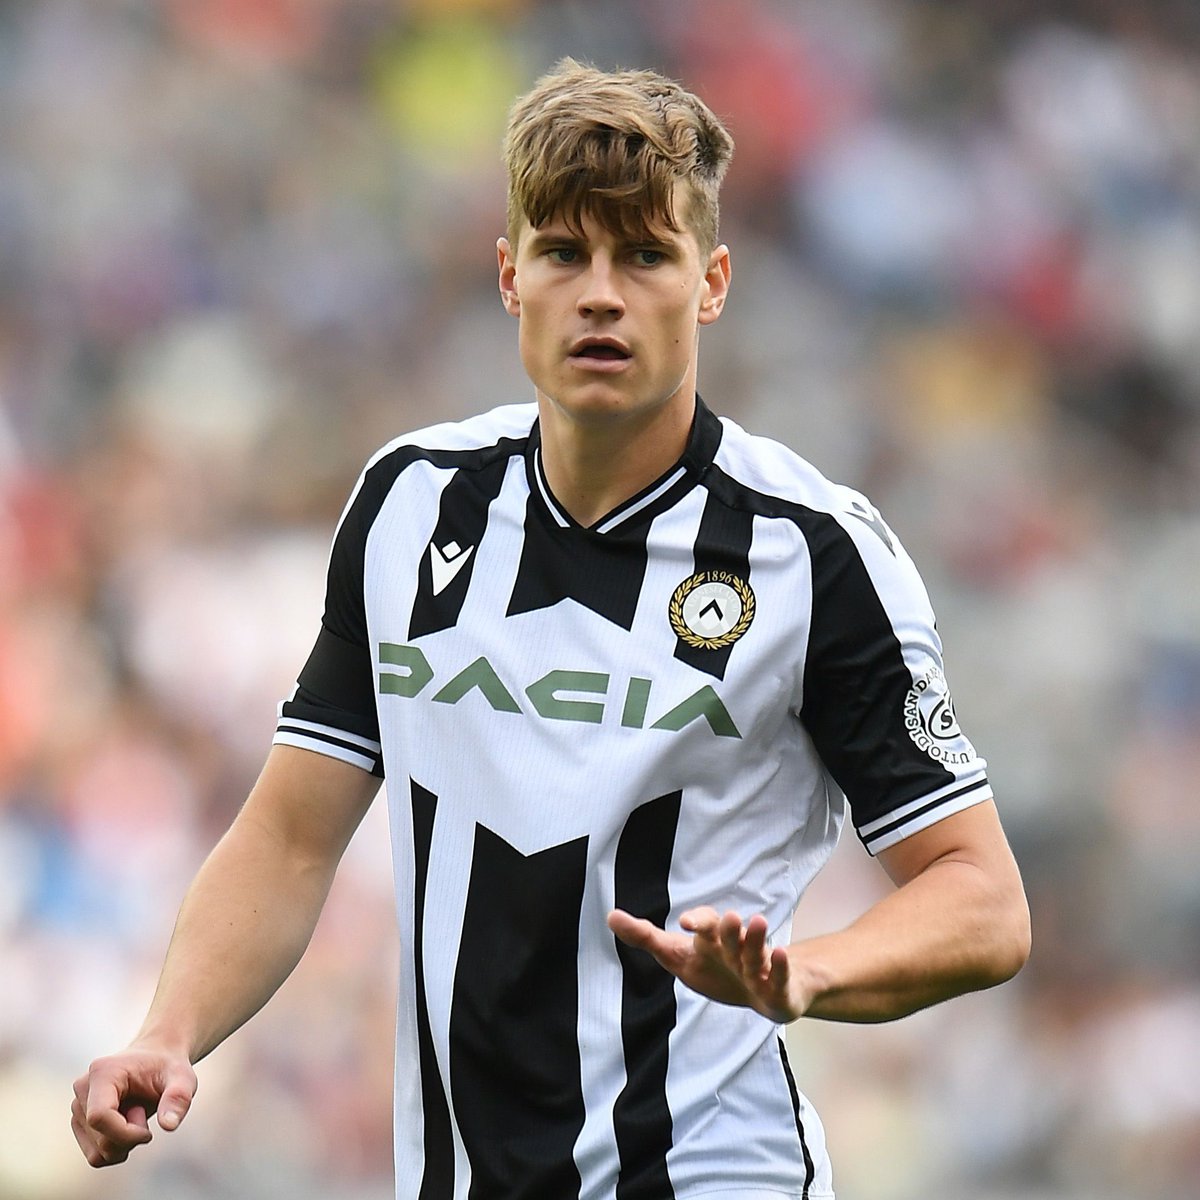 🚨 Despite rumours, #Inter is NOT interested in Udinese defender Jaka Bijol. The club has other names in mind in order to strengthen the defence for next season. ❌🇸🇮

[via @fcin1908it]